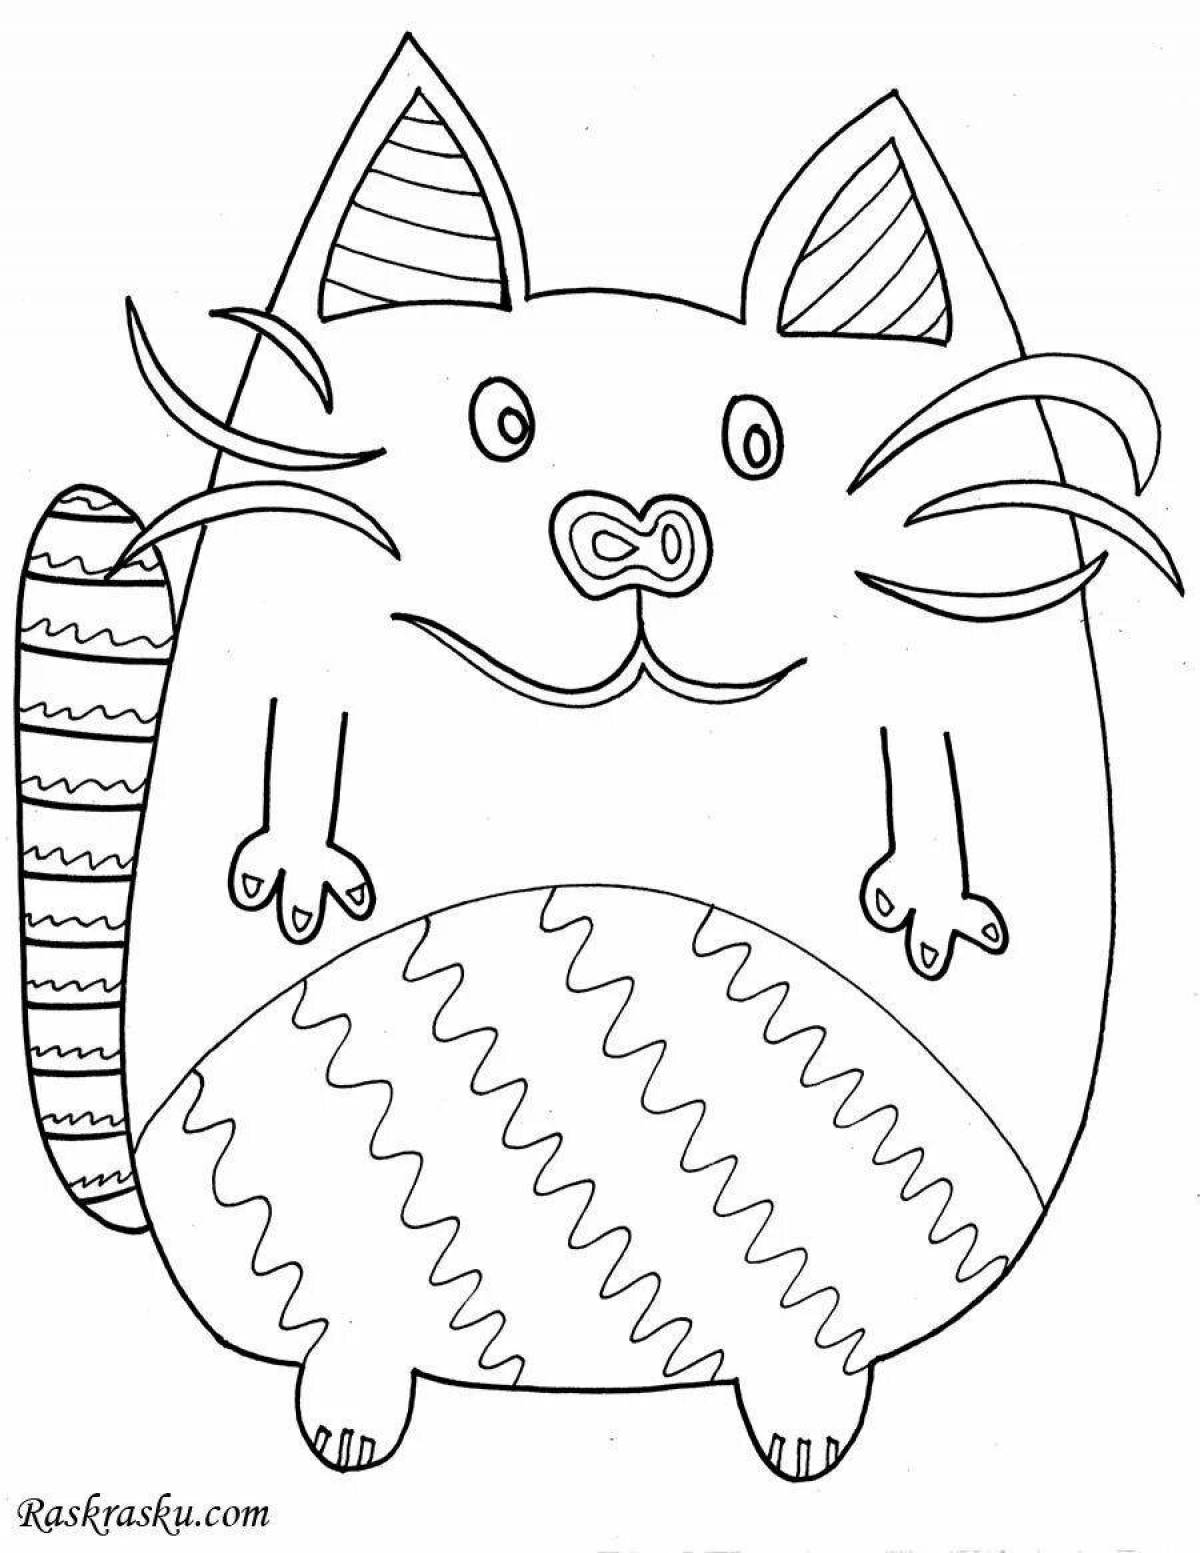 Coloring book hugging chubby cat